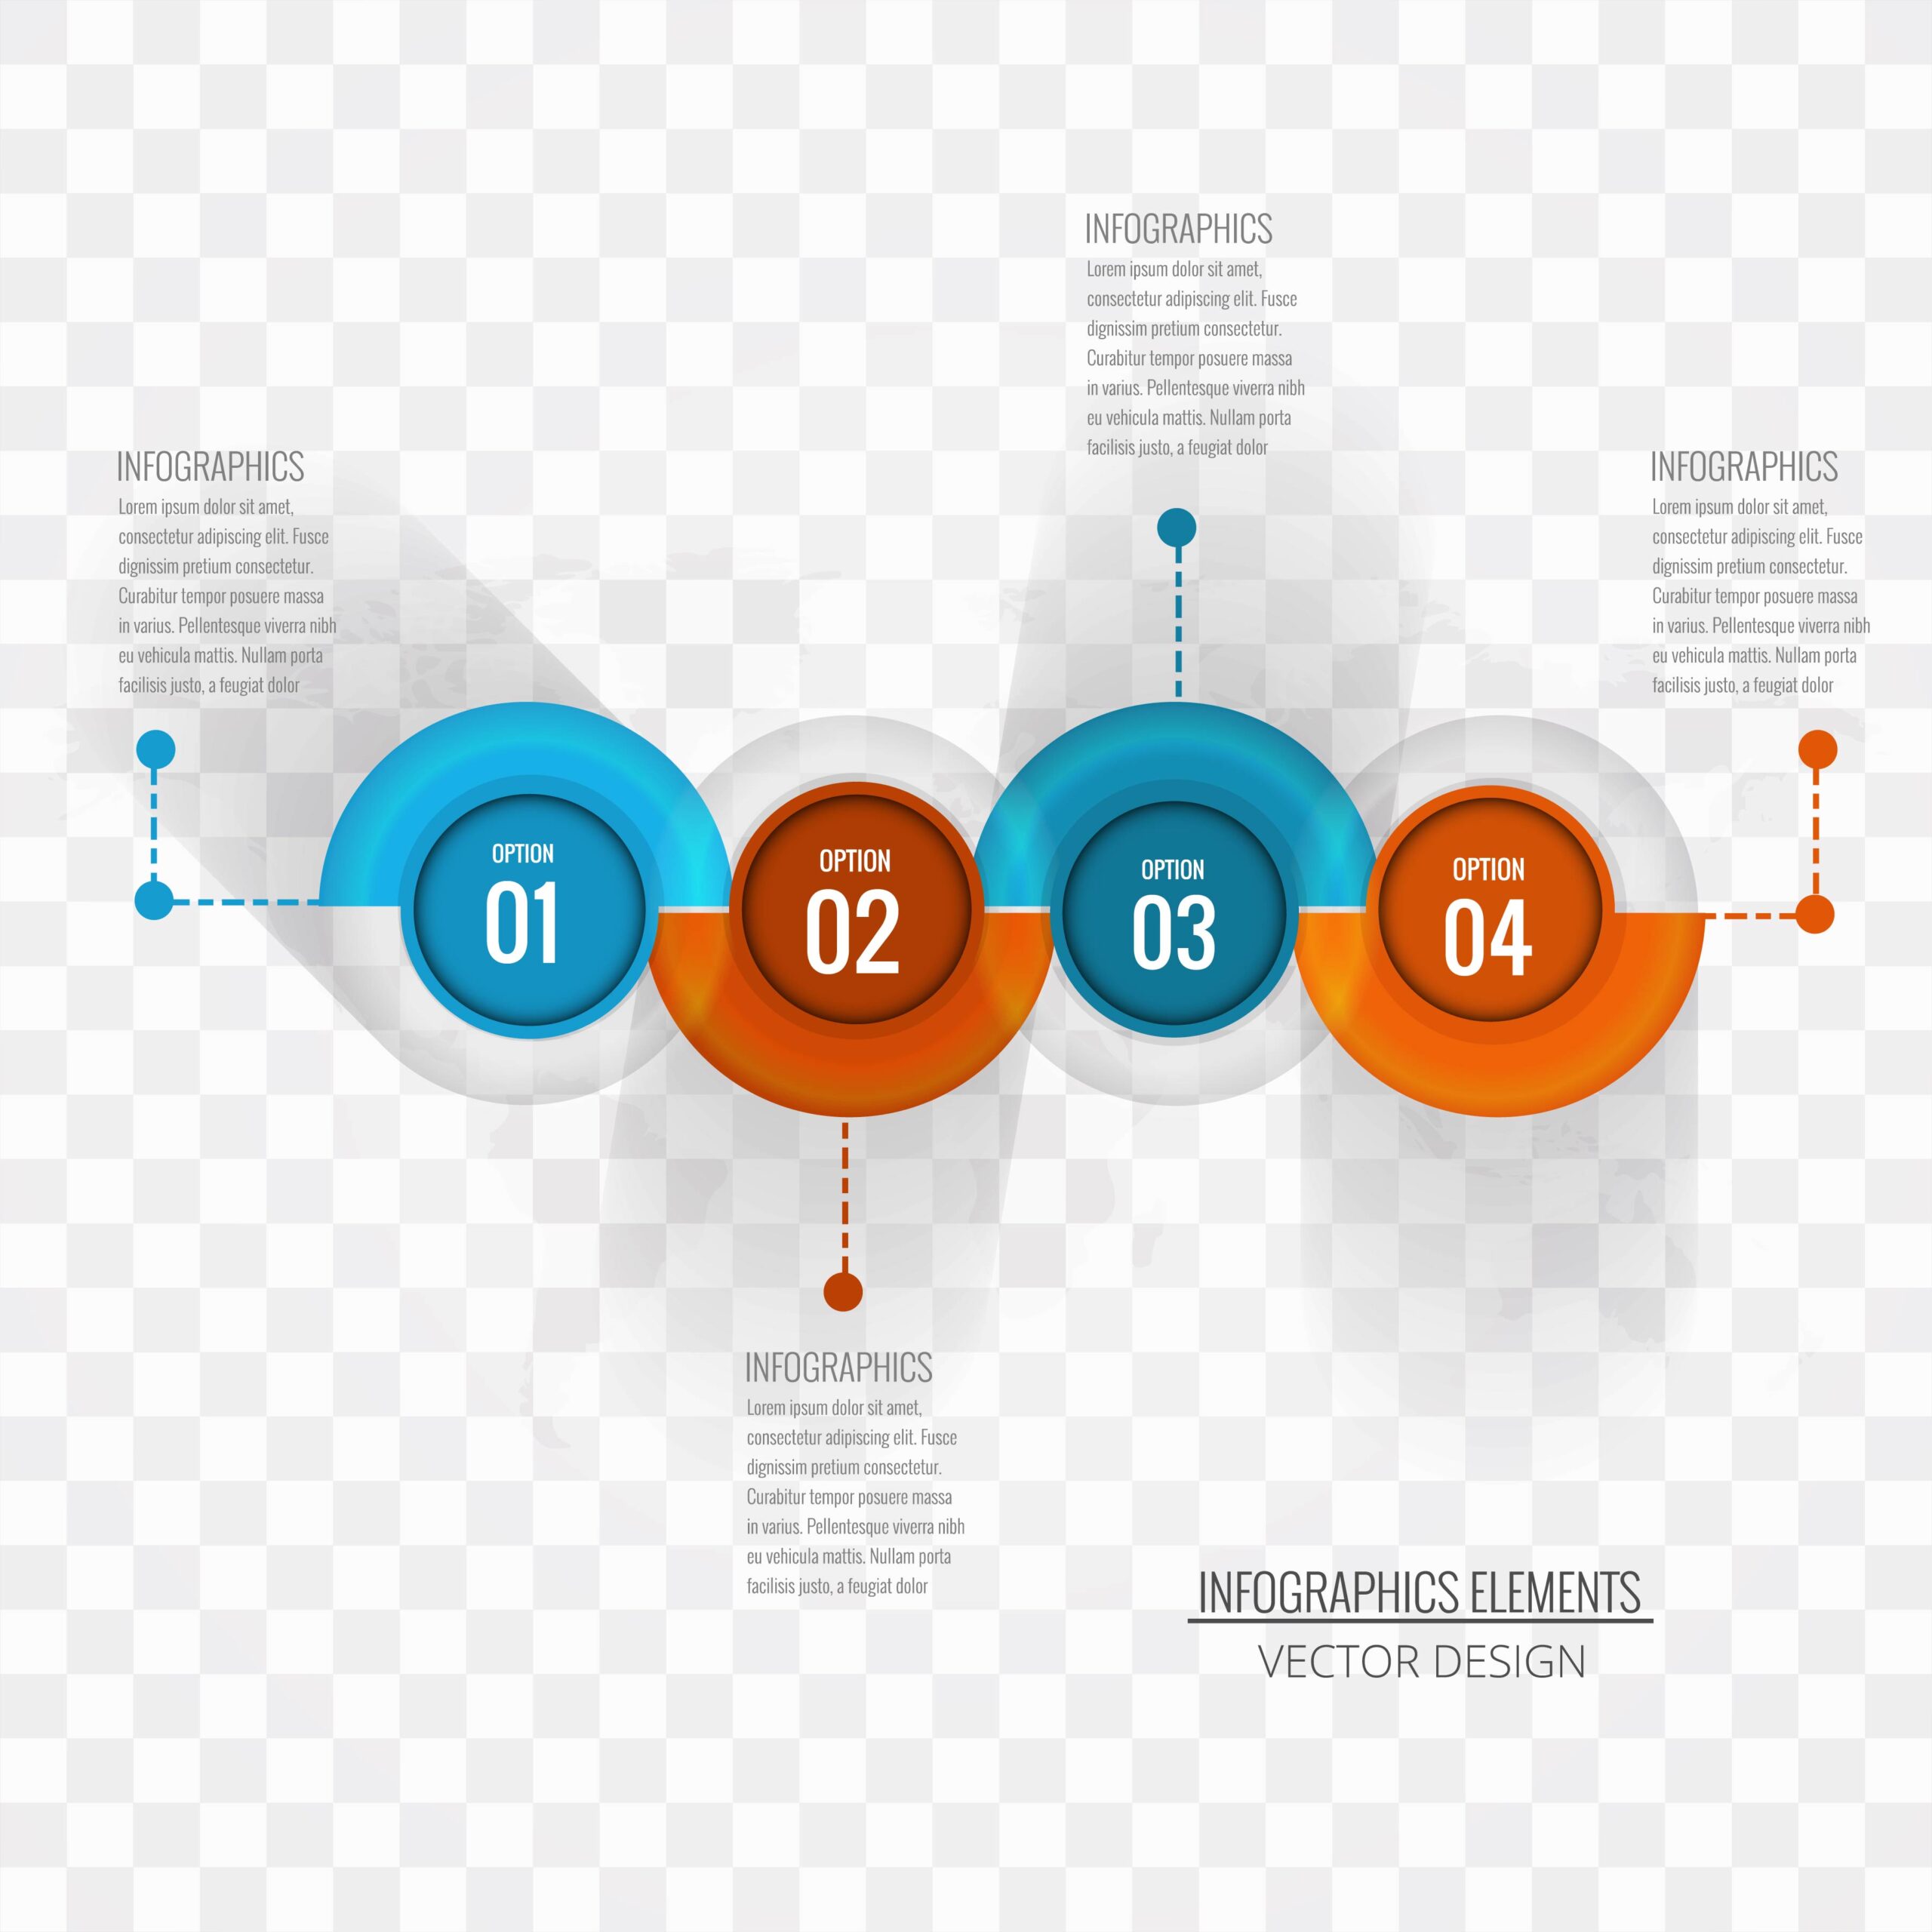 Modern Infographic Options Template by Andrew_Kras | GraphicRiver